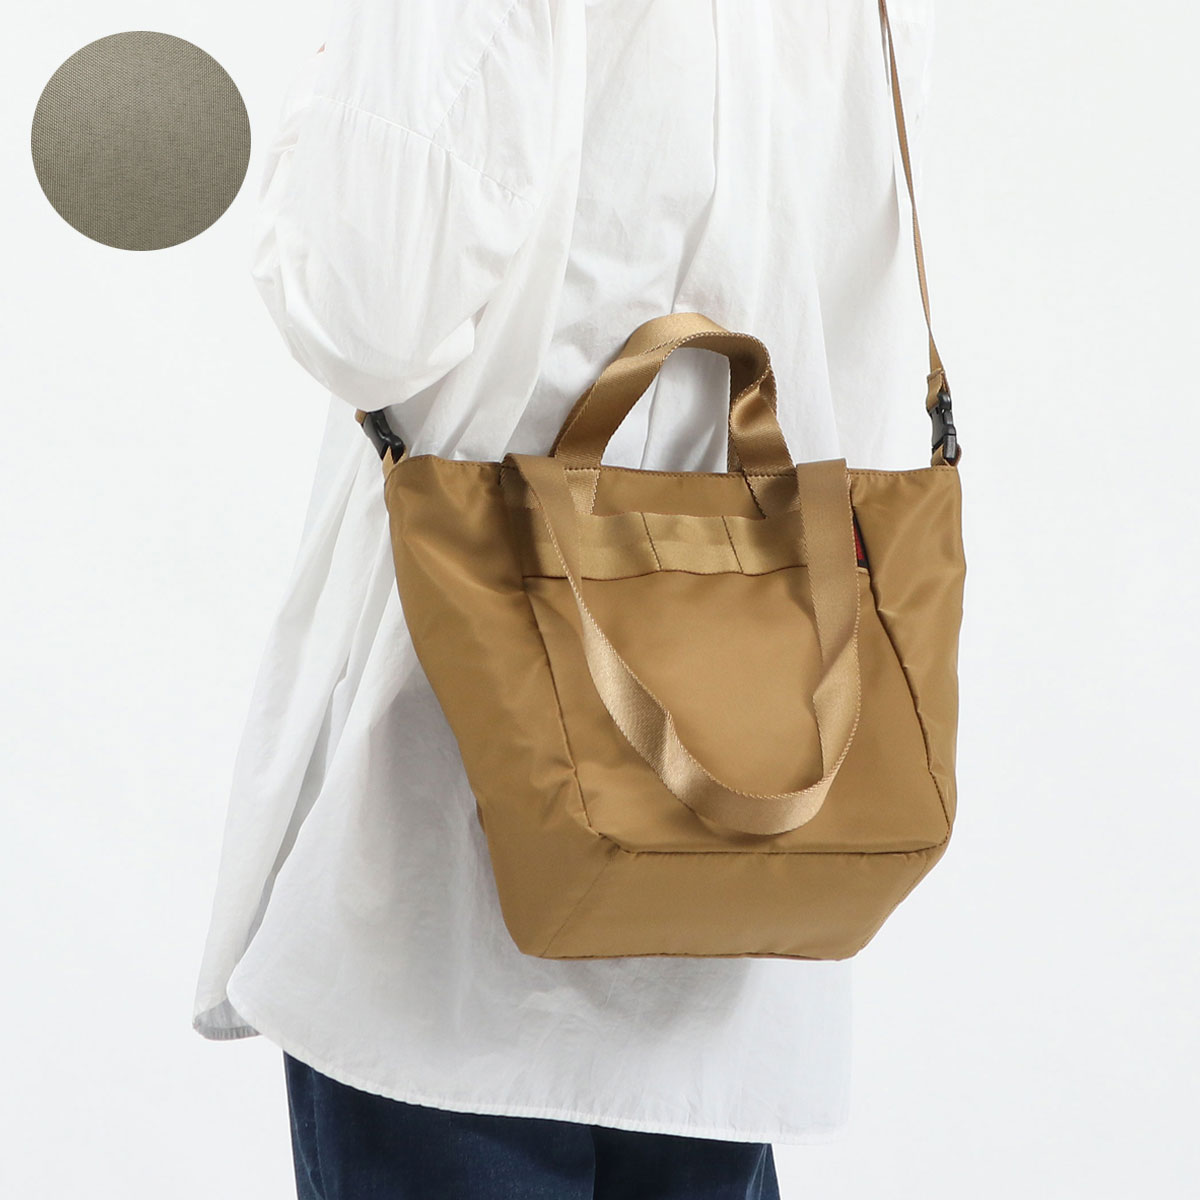 BRIEFING ブリーフィング JUNO 3WAY TOTE S トートバッグ